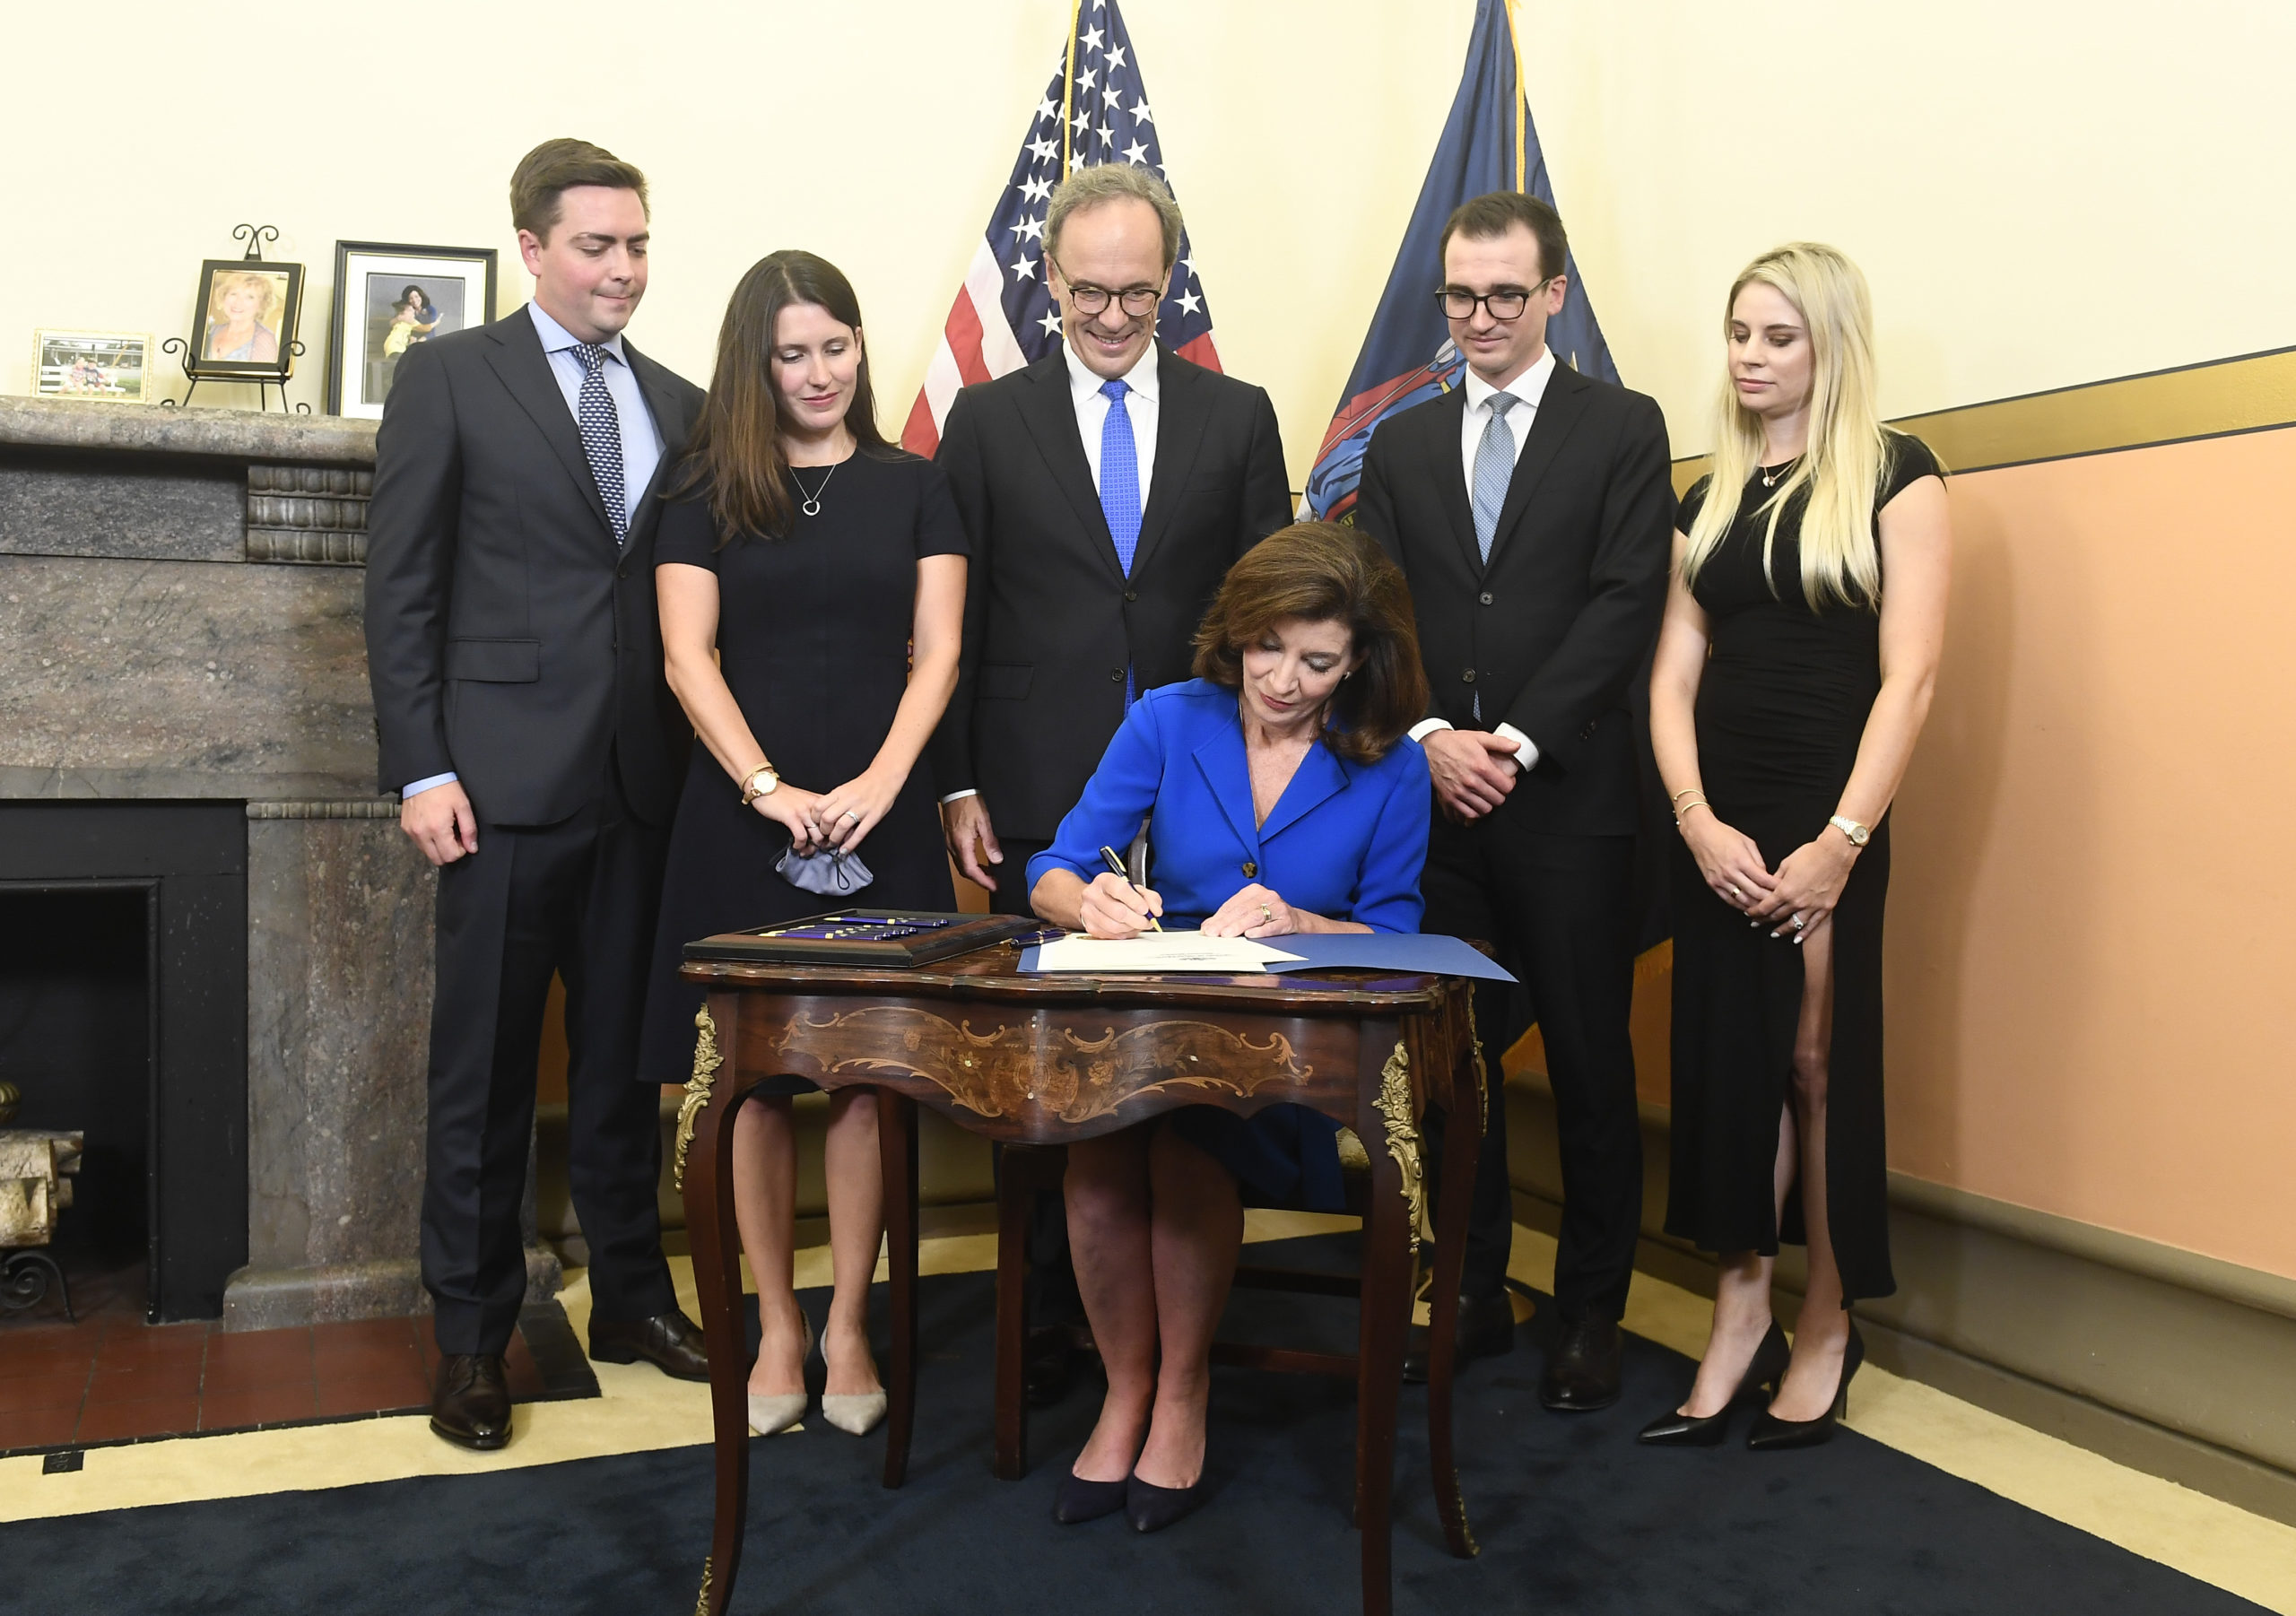 Family watches as New York Gov. Kathy Hochul signs documents at her swearing-in at the state Capitol in Albany, New York. (Hans Pennink-Pool/Getty Images)